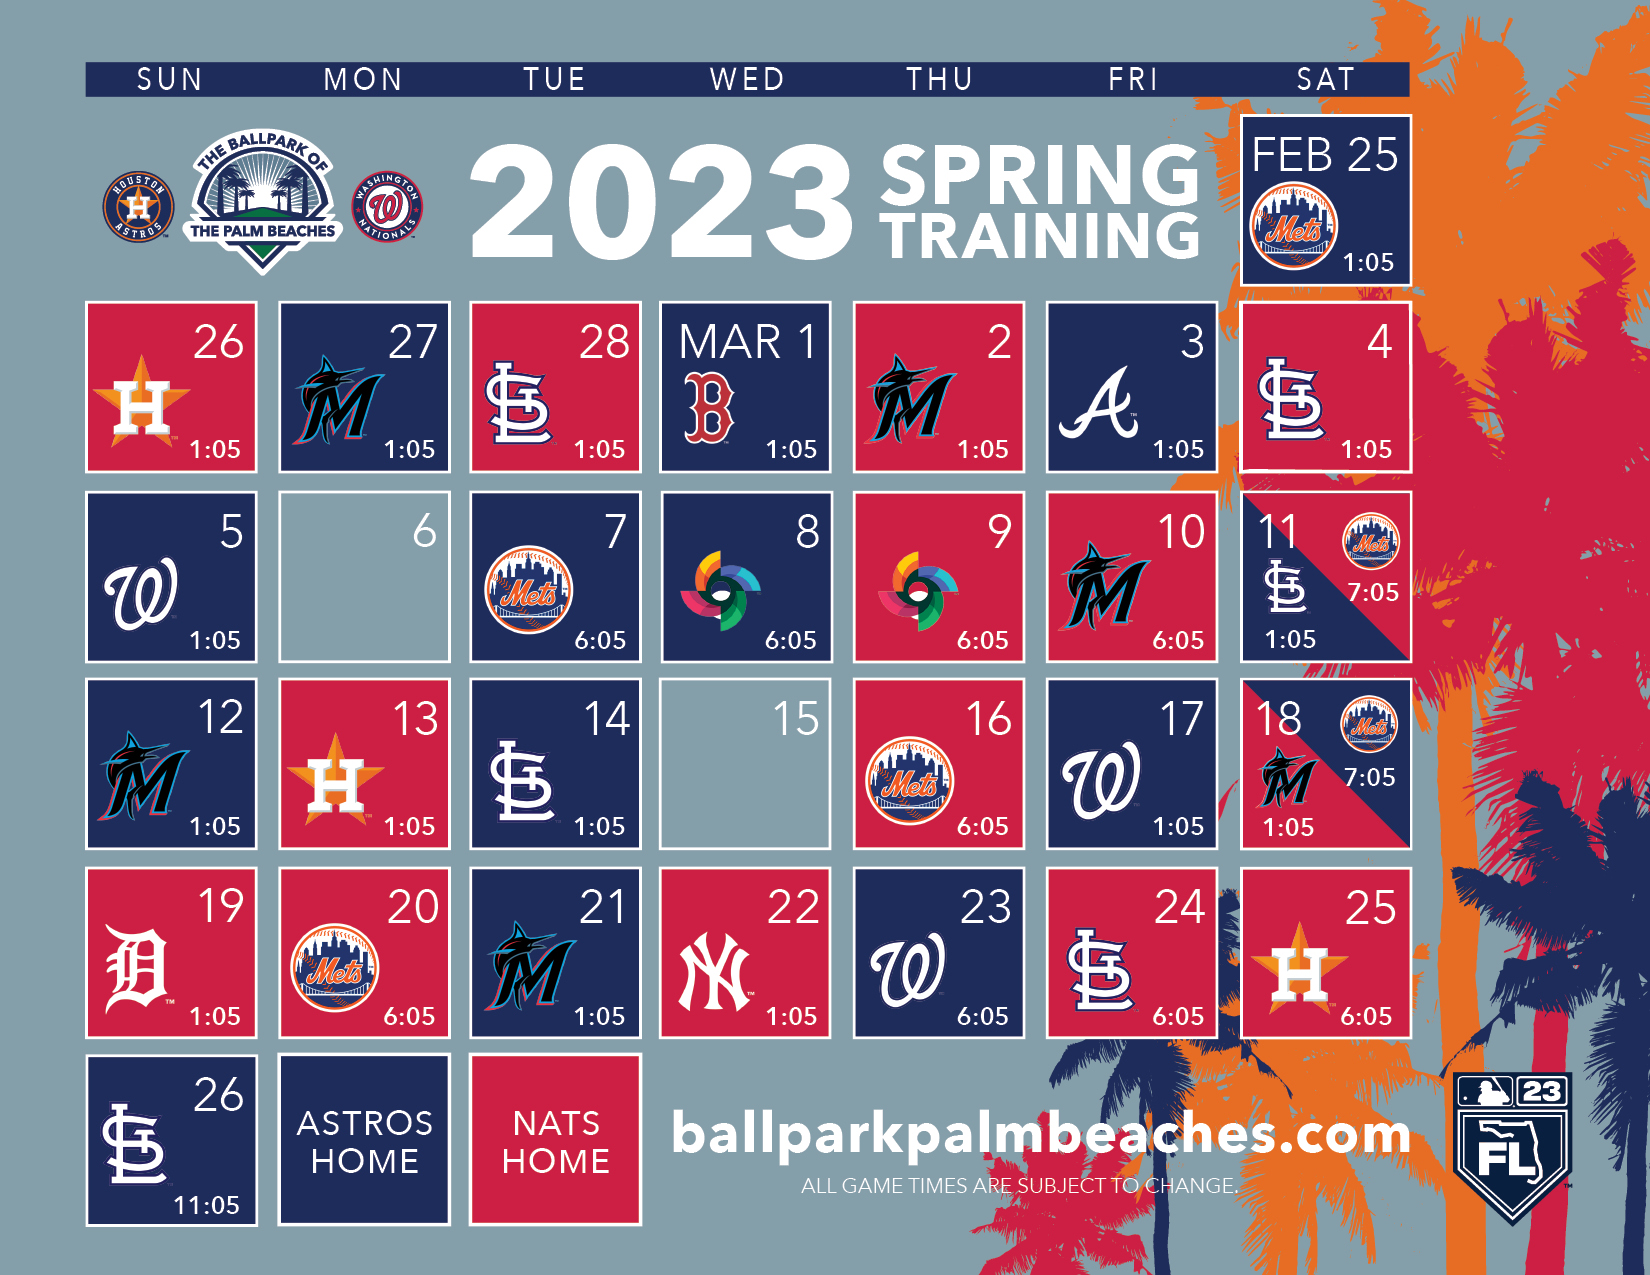 The Active Adult Guide to Grapefruit League Spring Training Games